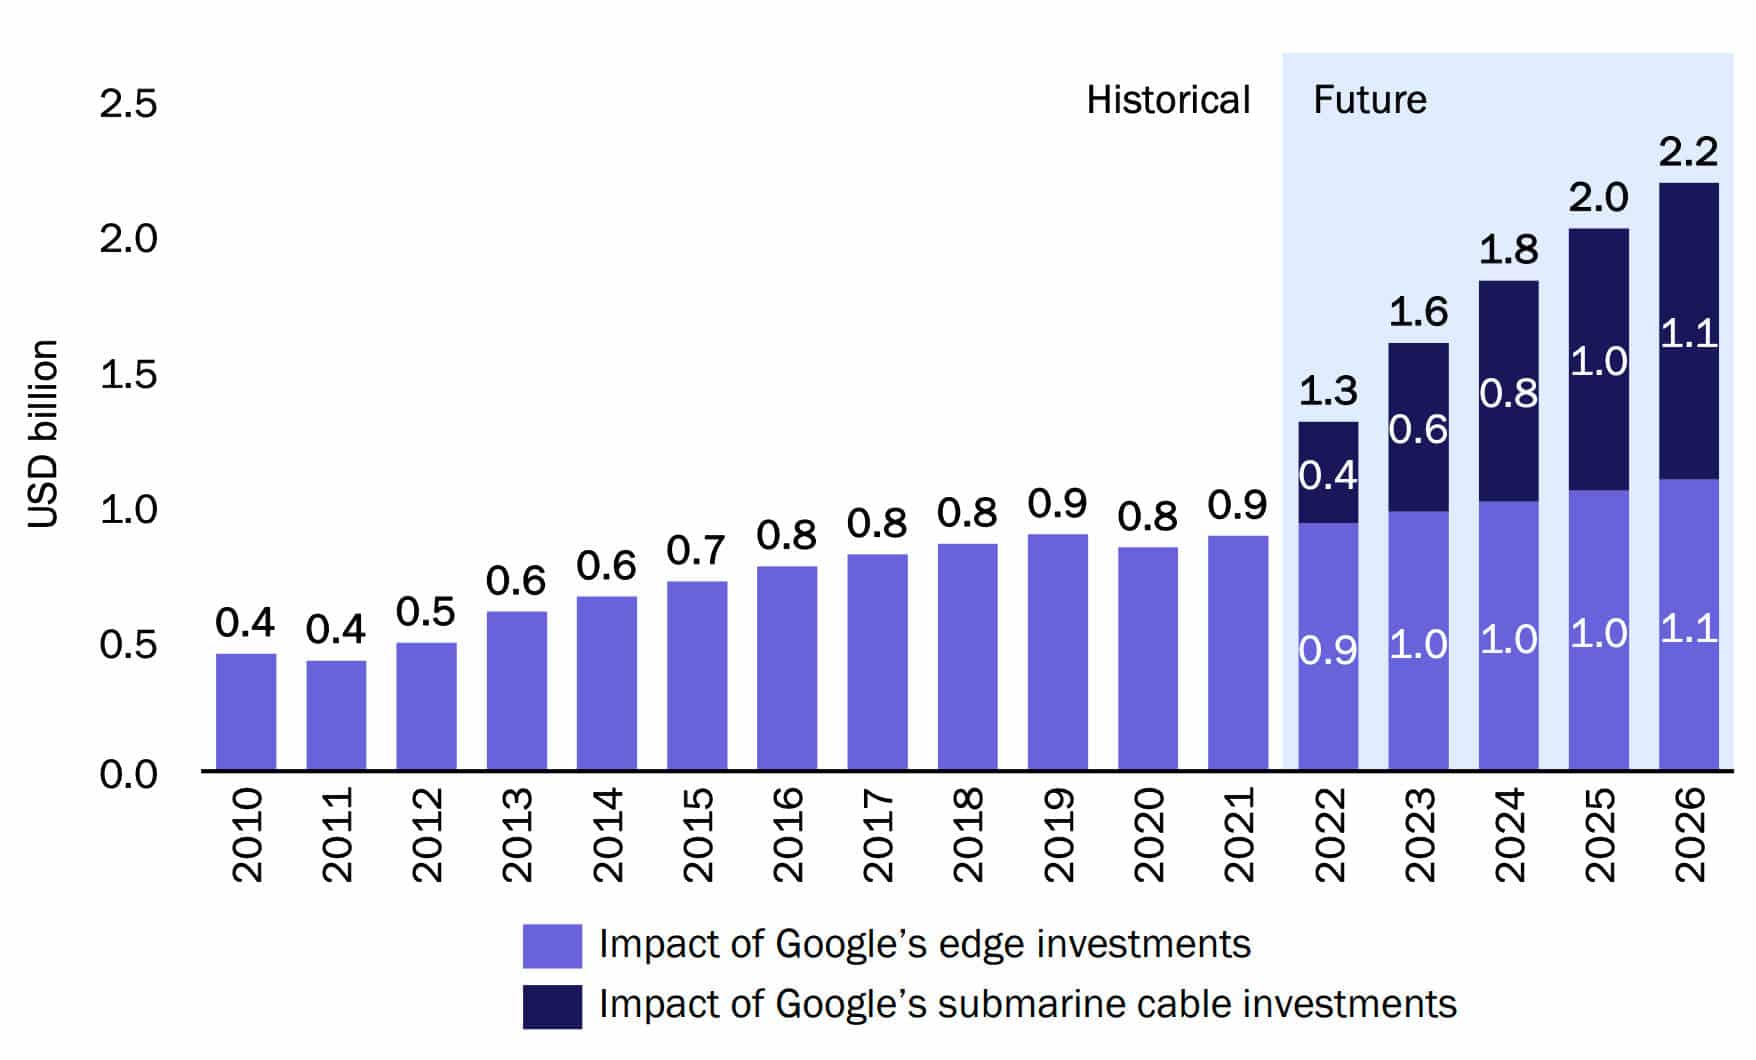 Increase in real GDP attributable to Google's network investments in Malaysia